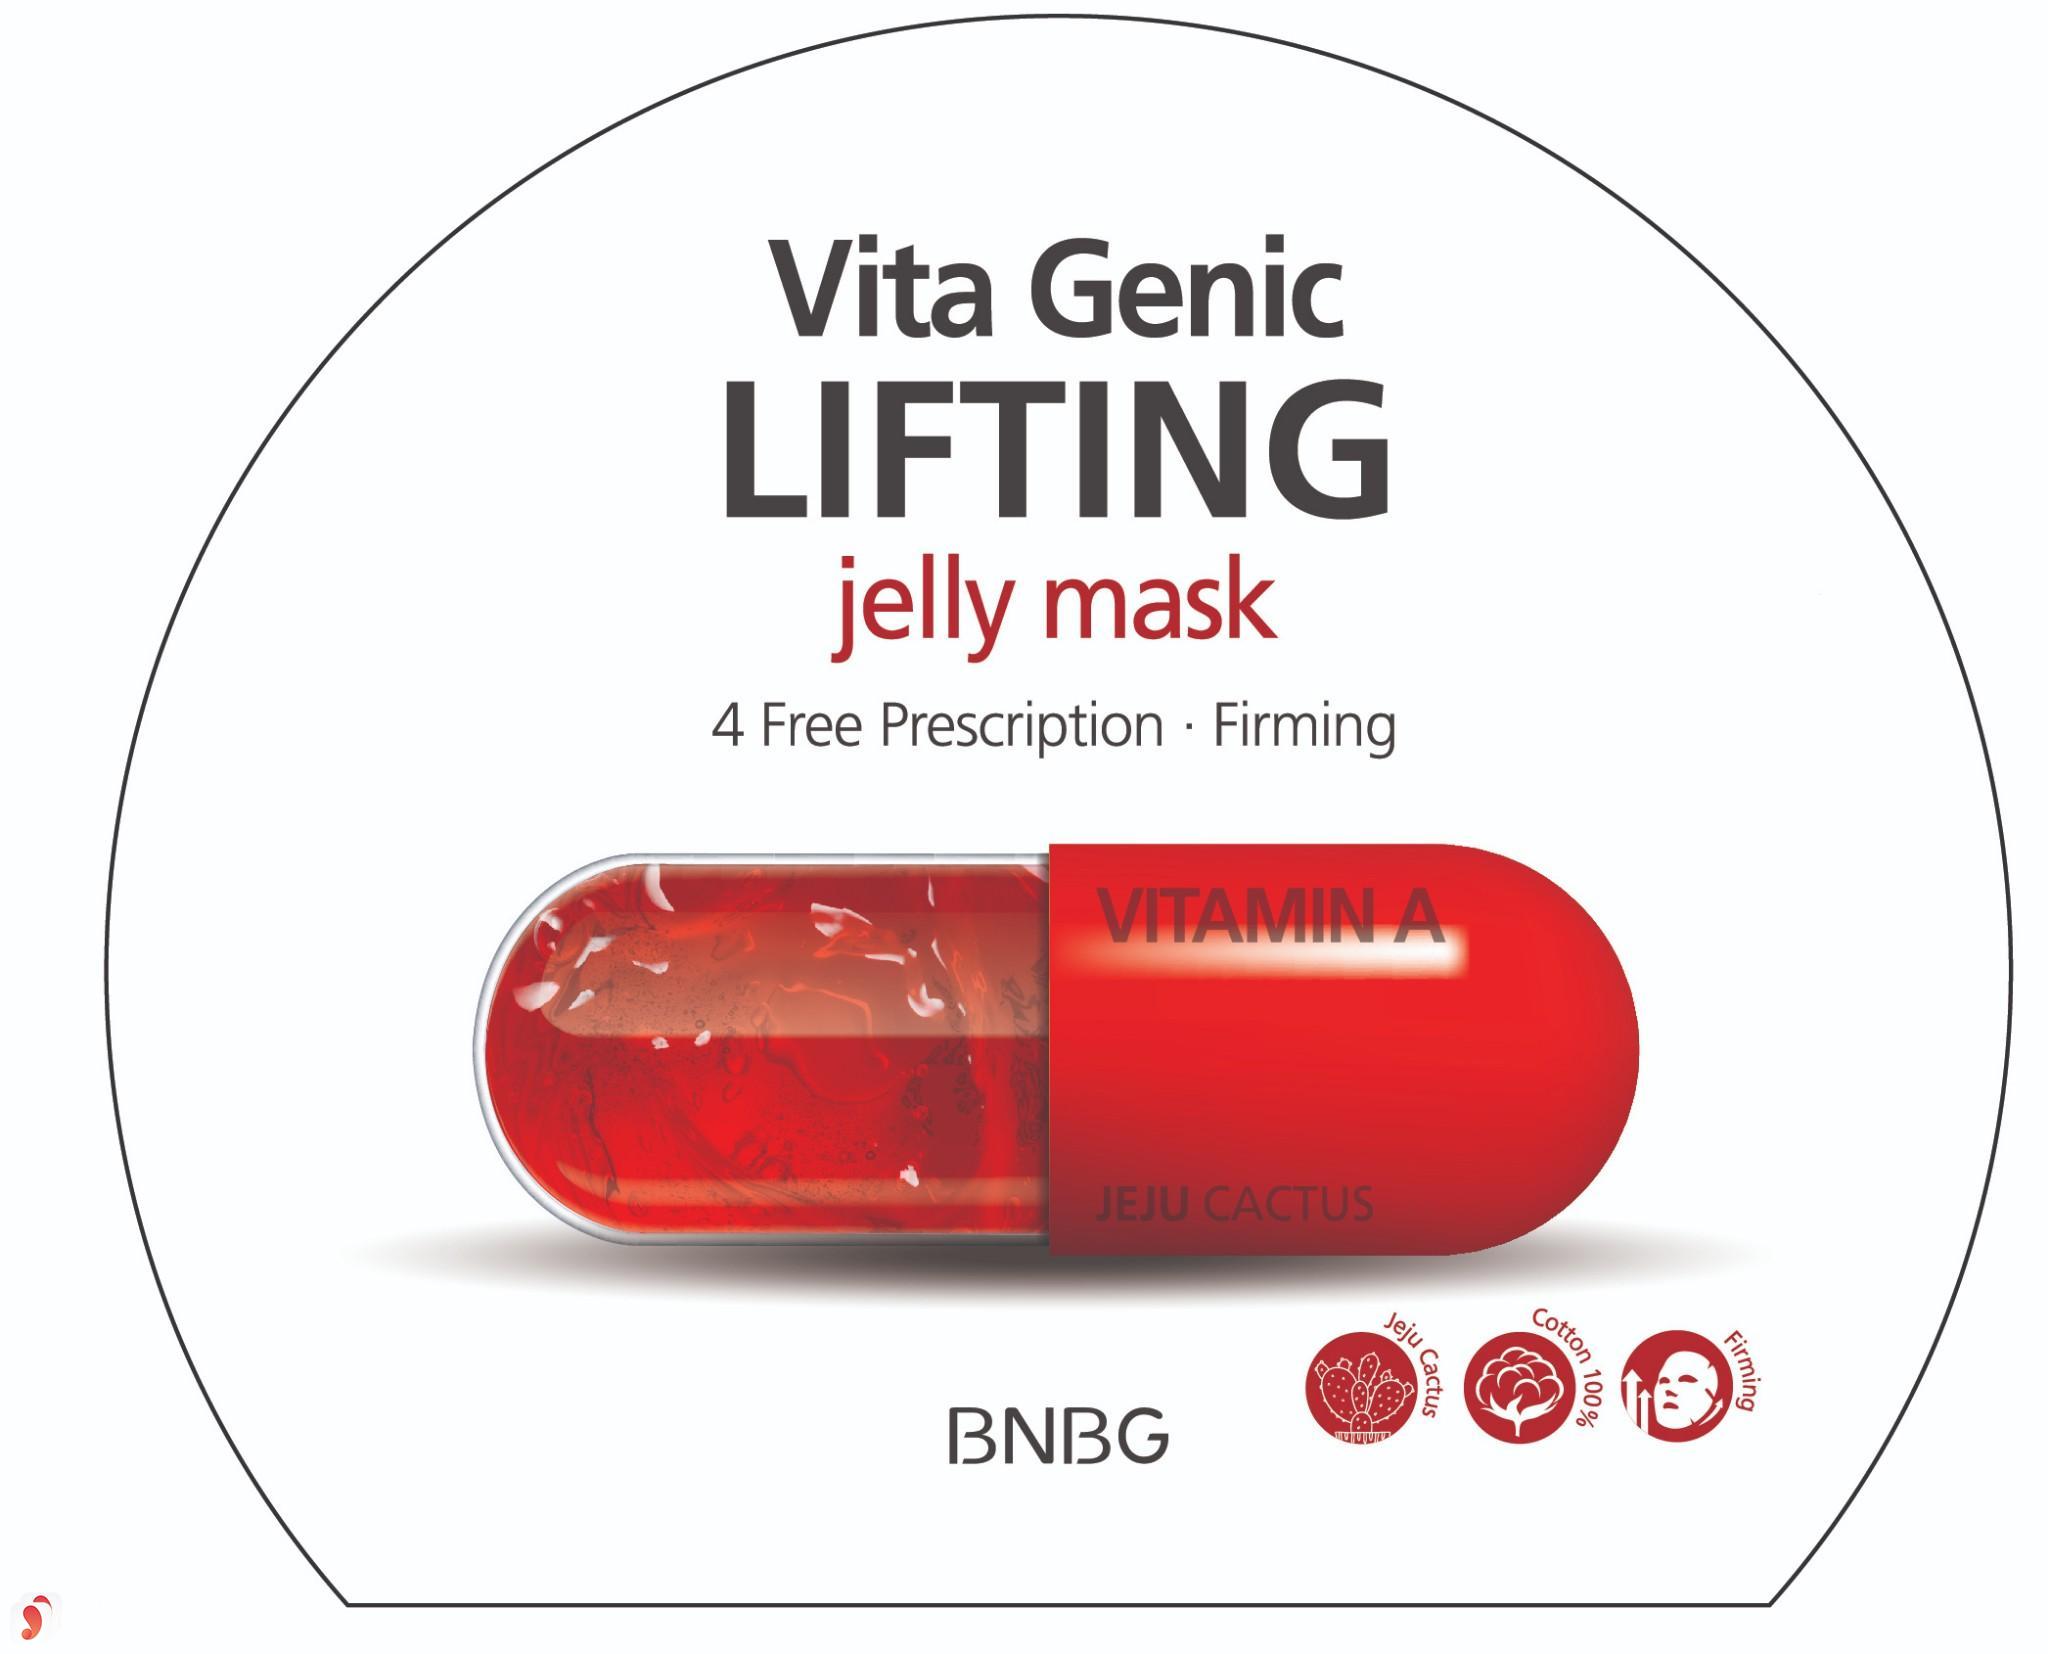 Review chi tiết mặt nạ Vita Genic Jelly Mask 1